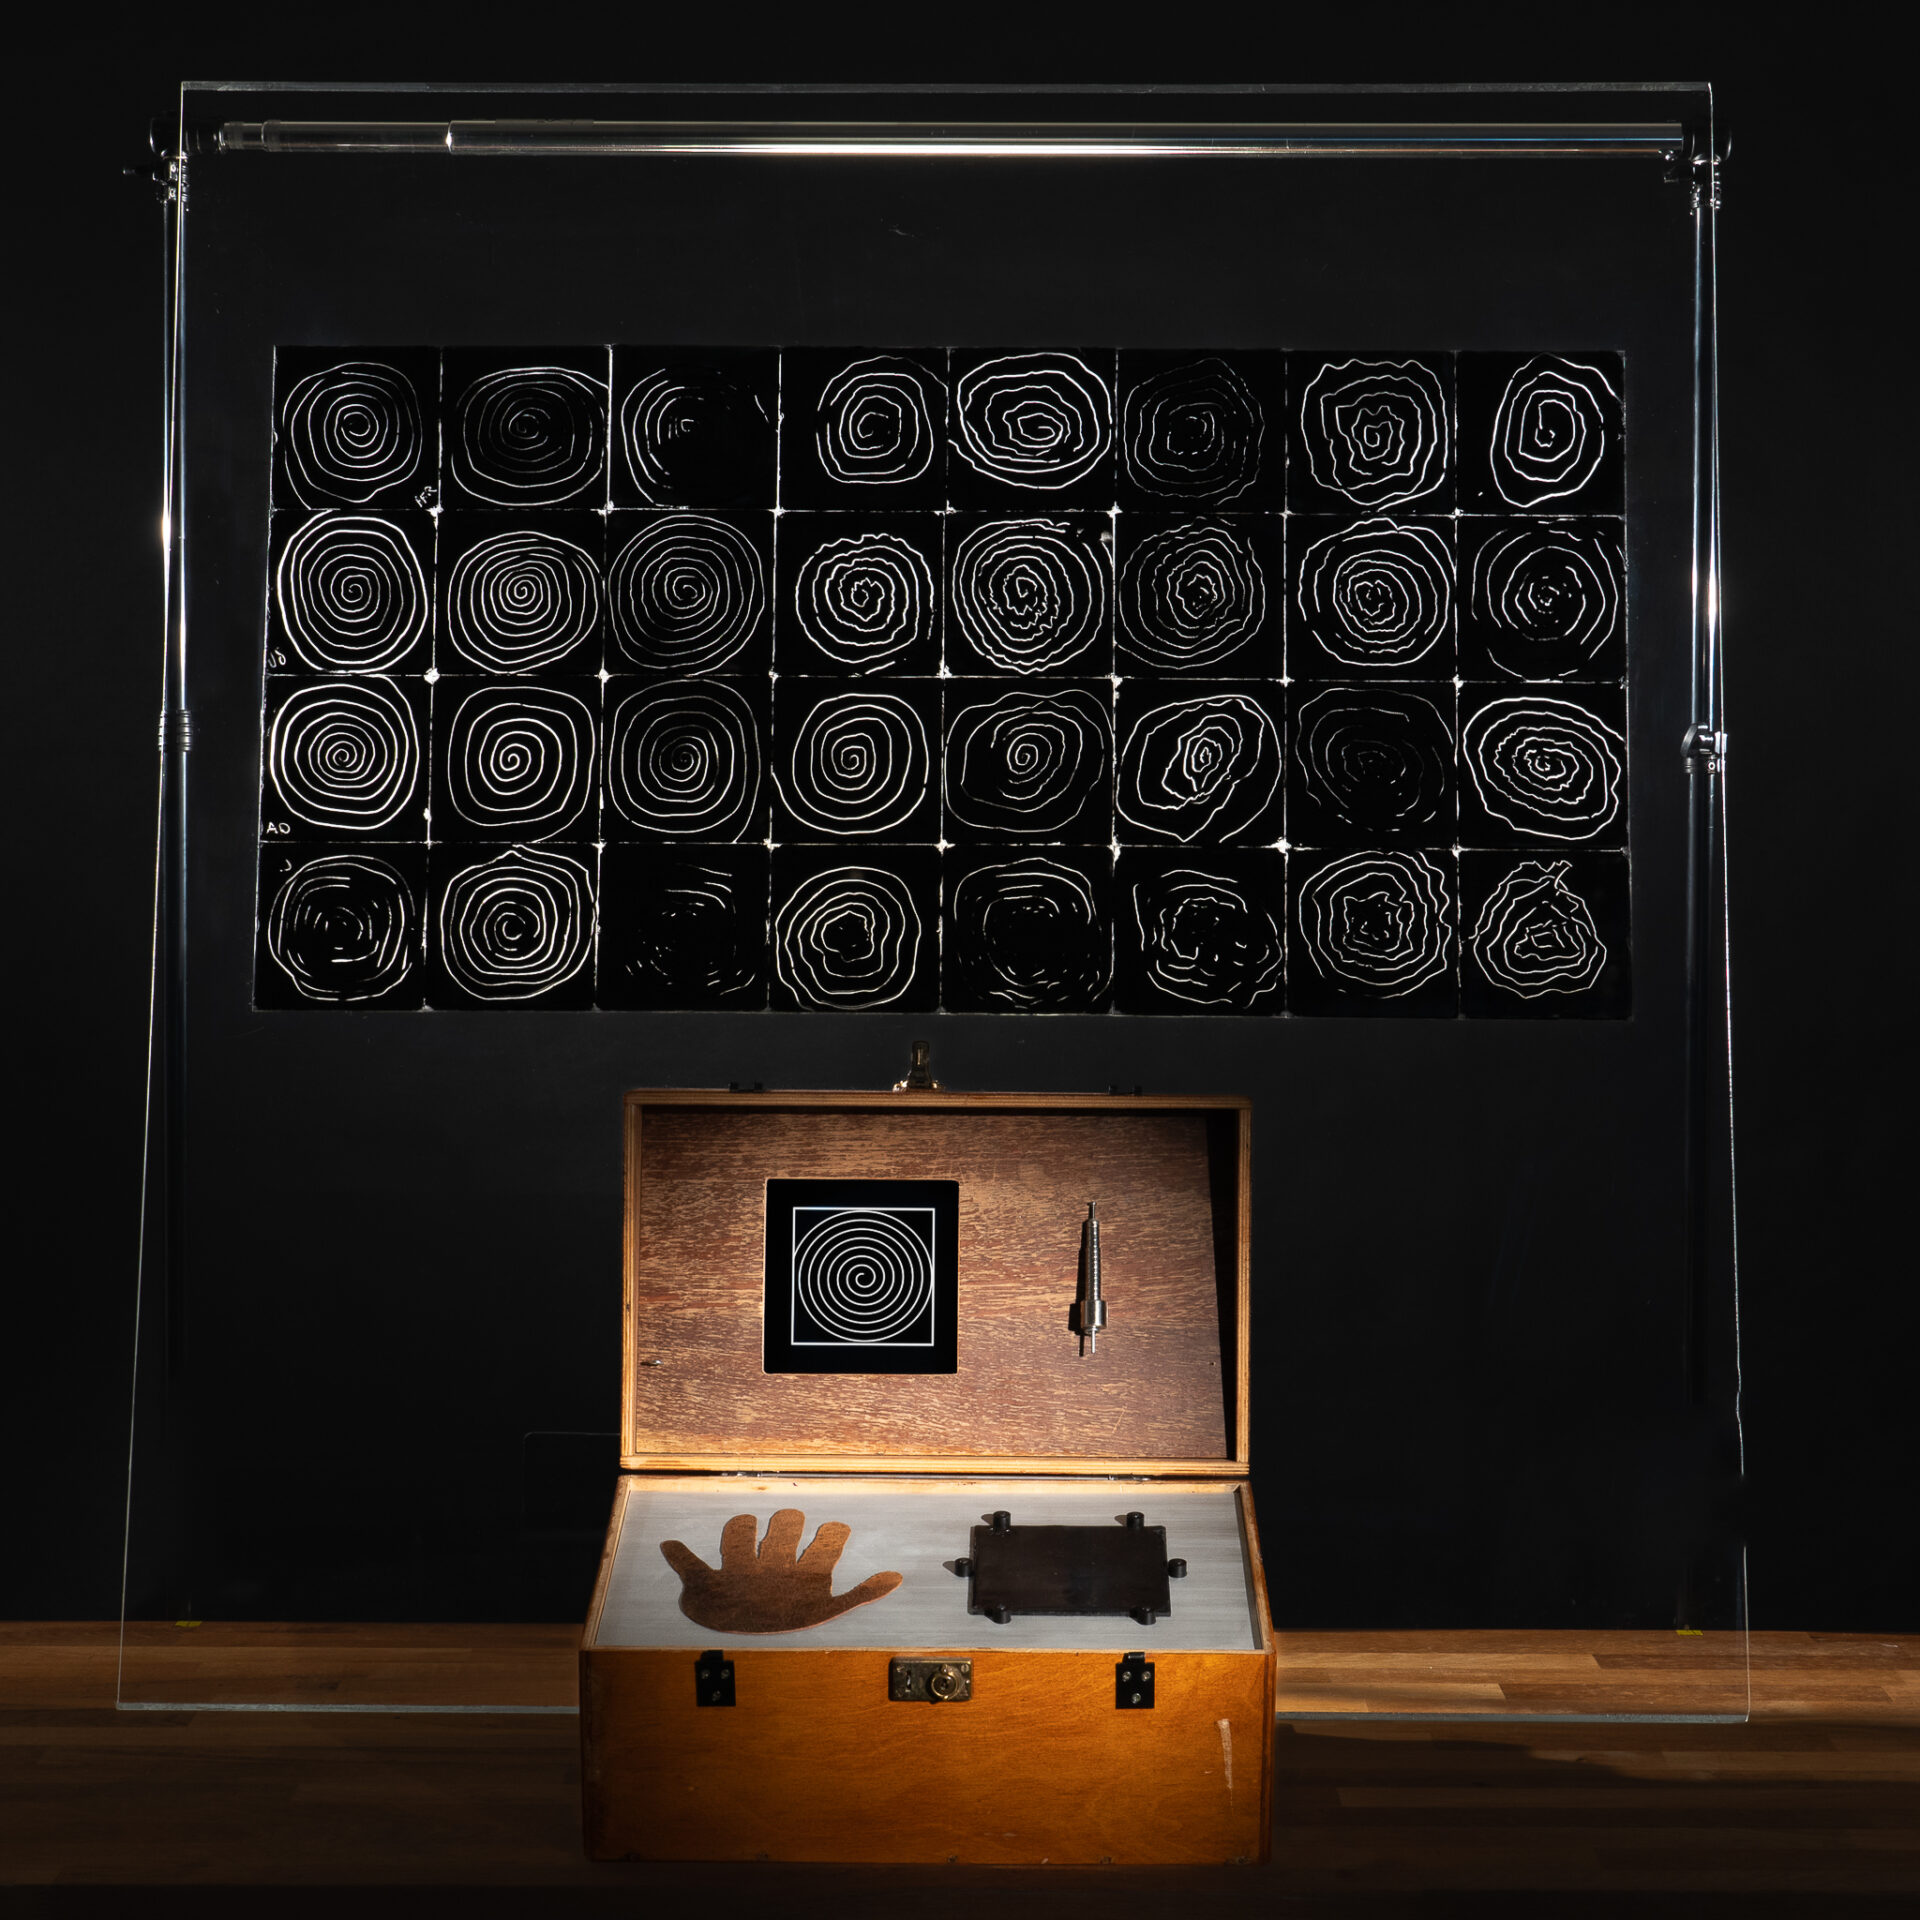 On a black wall is a 9 x 4 grid of black tiles with white spiral engravings on them. In front of this is an open wooden box, housing a small stylus, hand print, and space to fix sample tile for engraving.